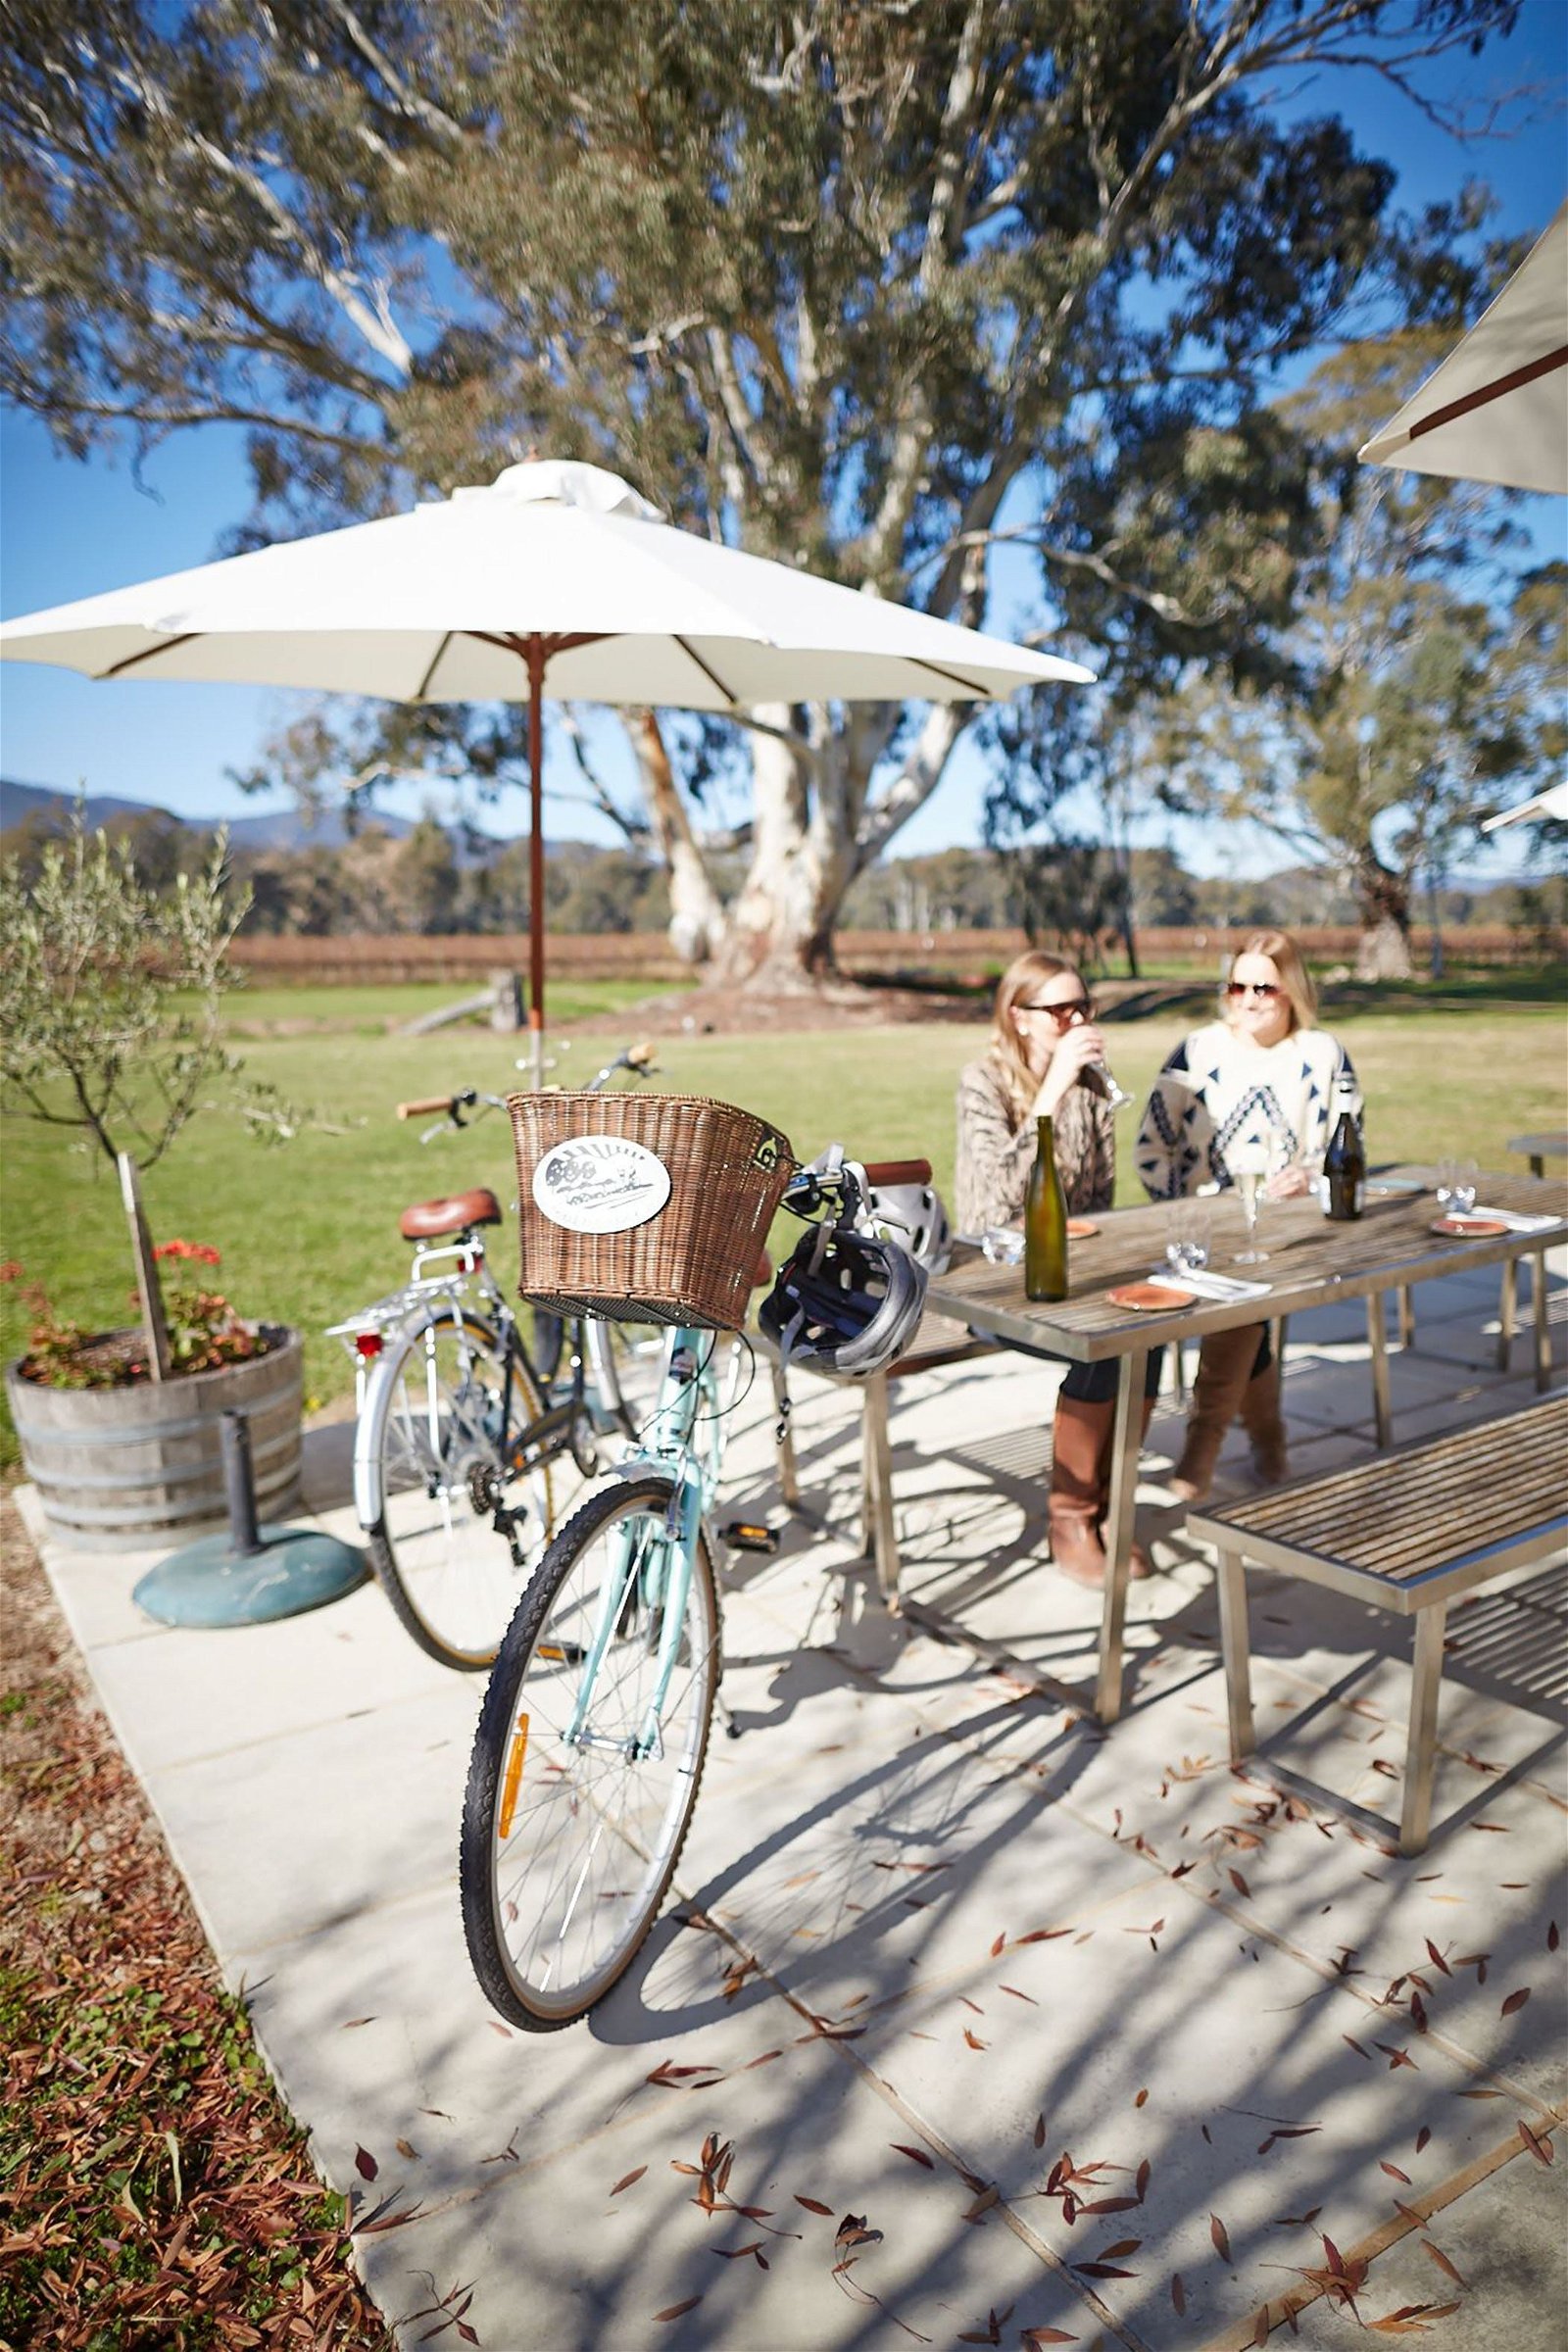 Dal Zotto Wines Cellar Door - New South Wales Tourism 